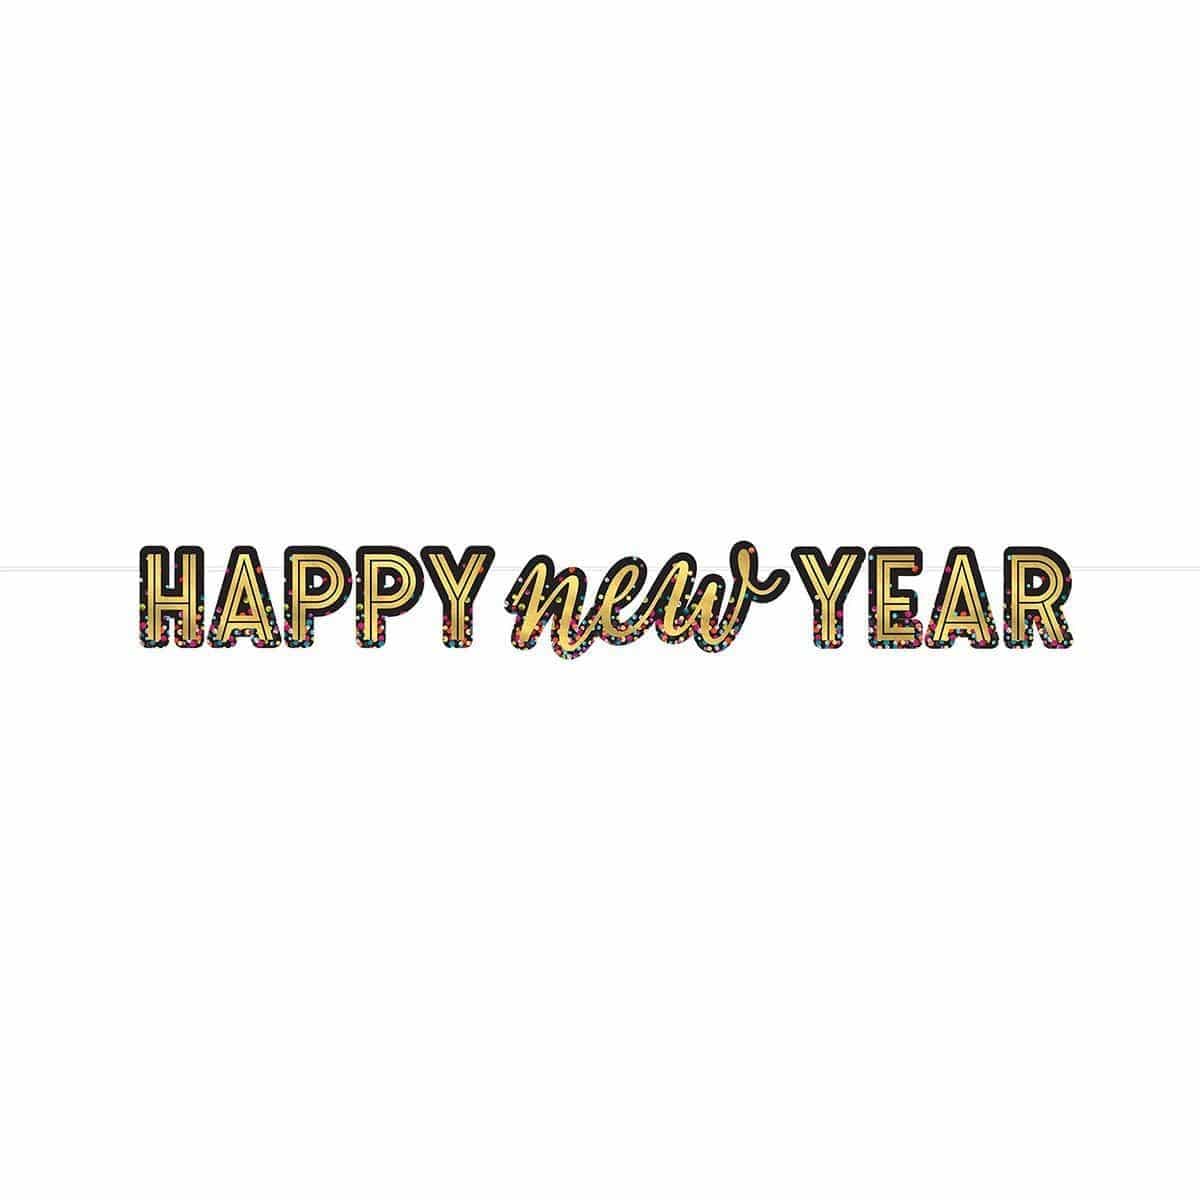 Buy New Year Happy New Year Letter Banner - Colorful Confetti sold at Party Expert